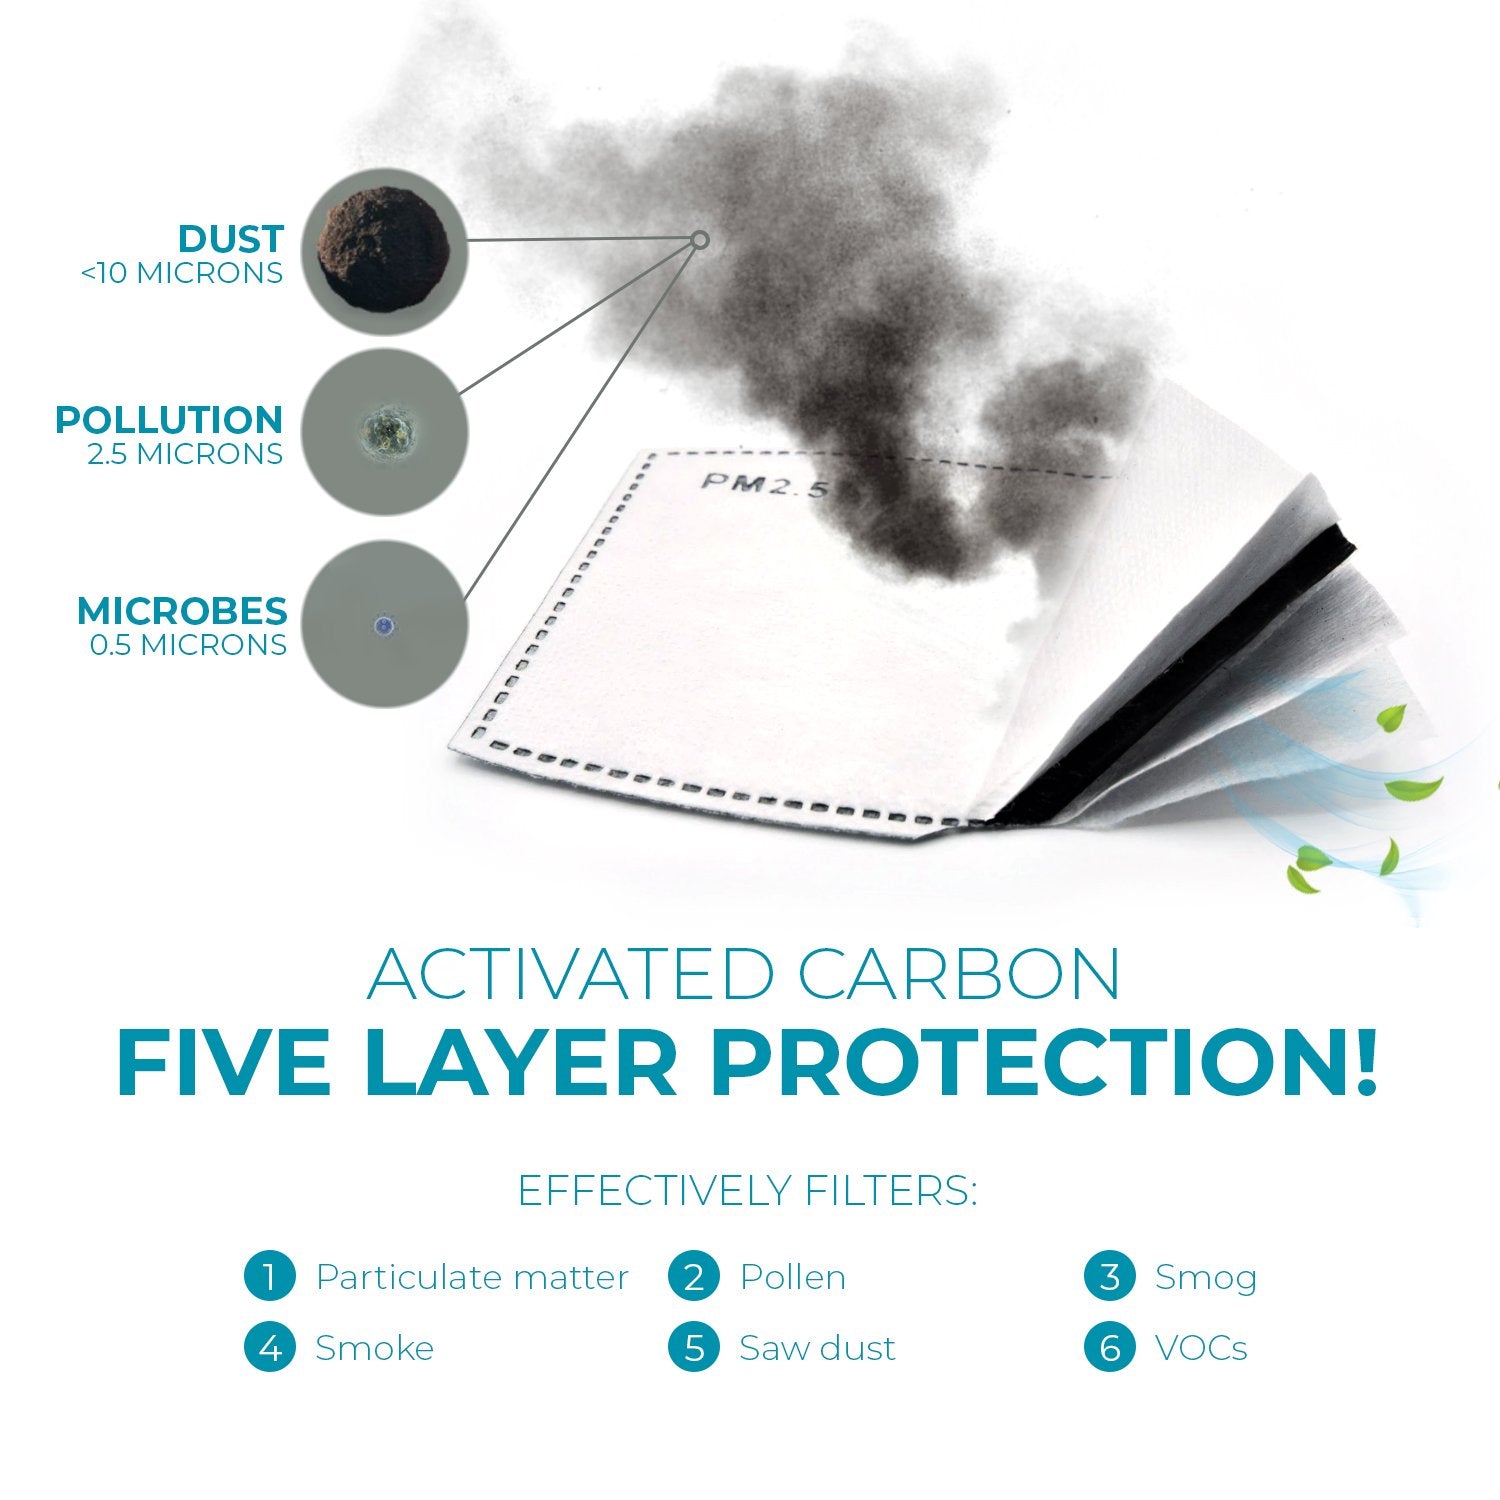 Activated Carbon Filters PM2.5 - 5 layers - 10 pcs